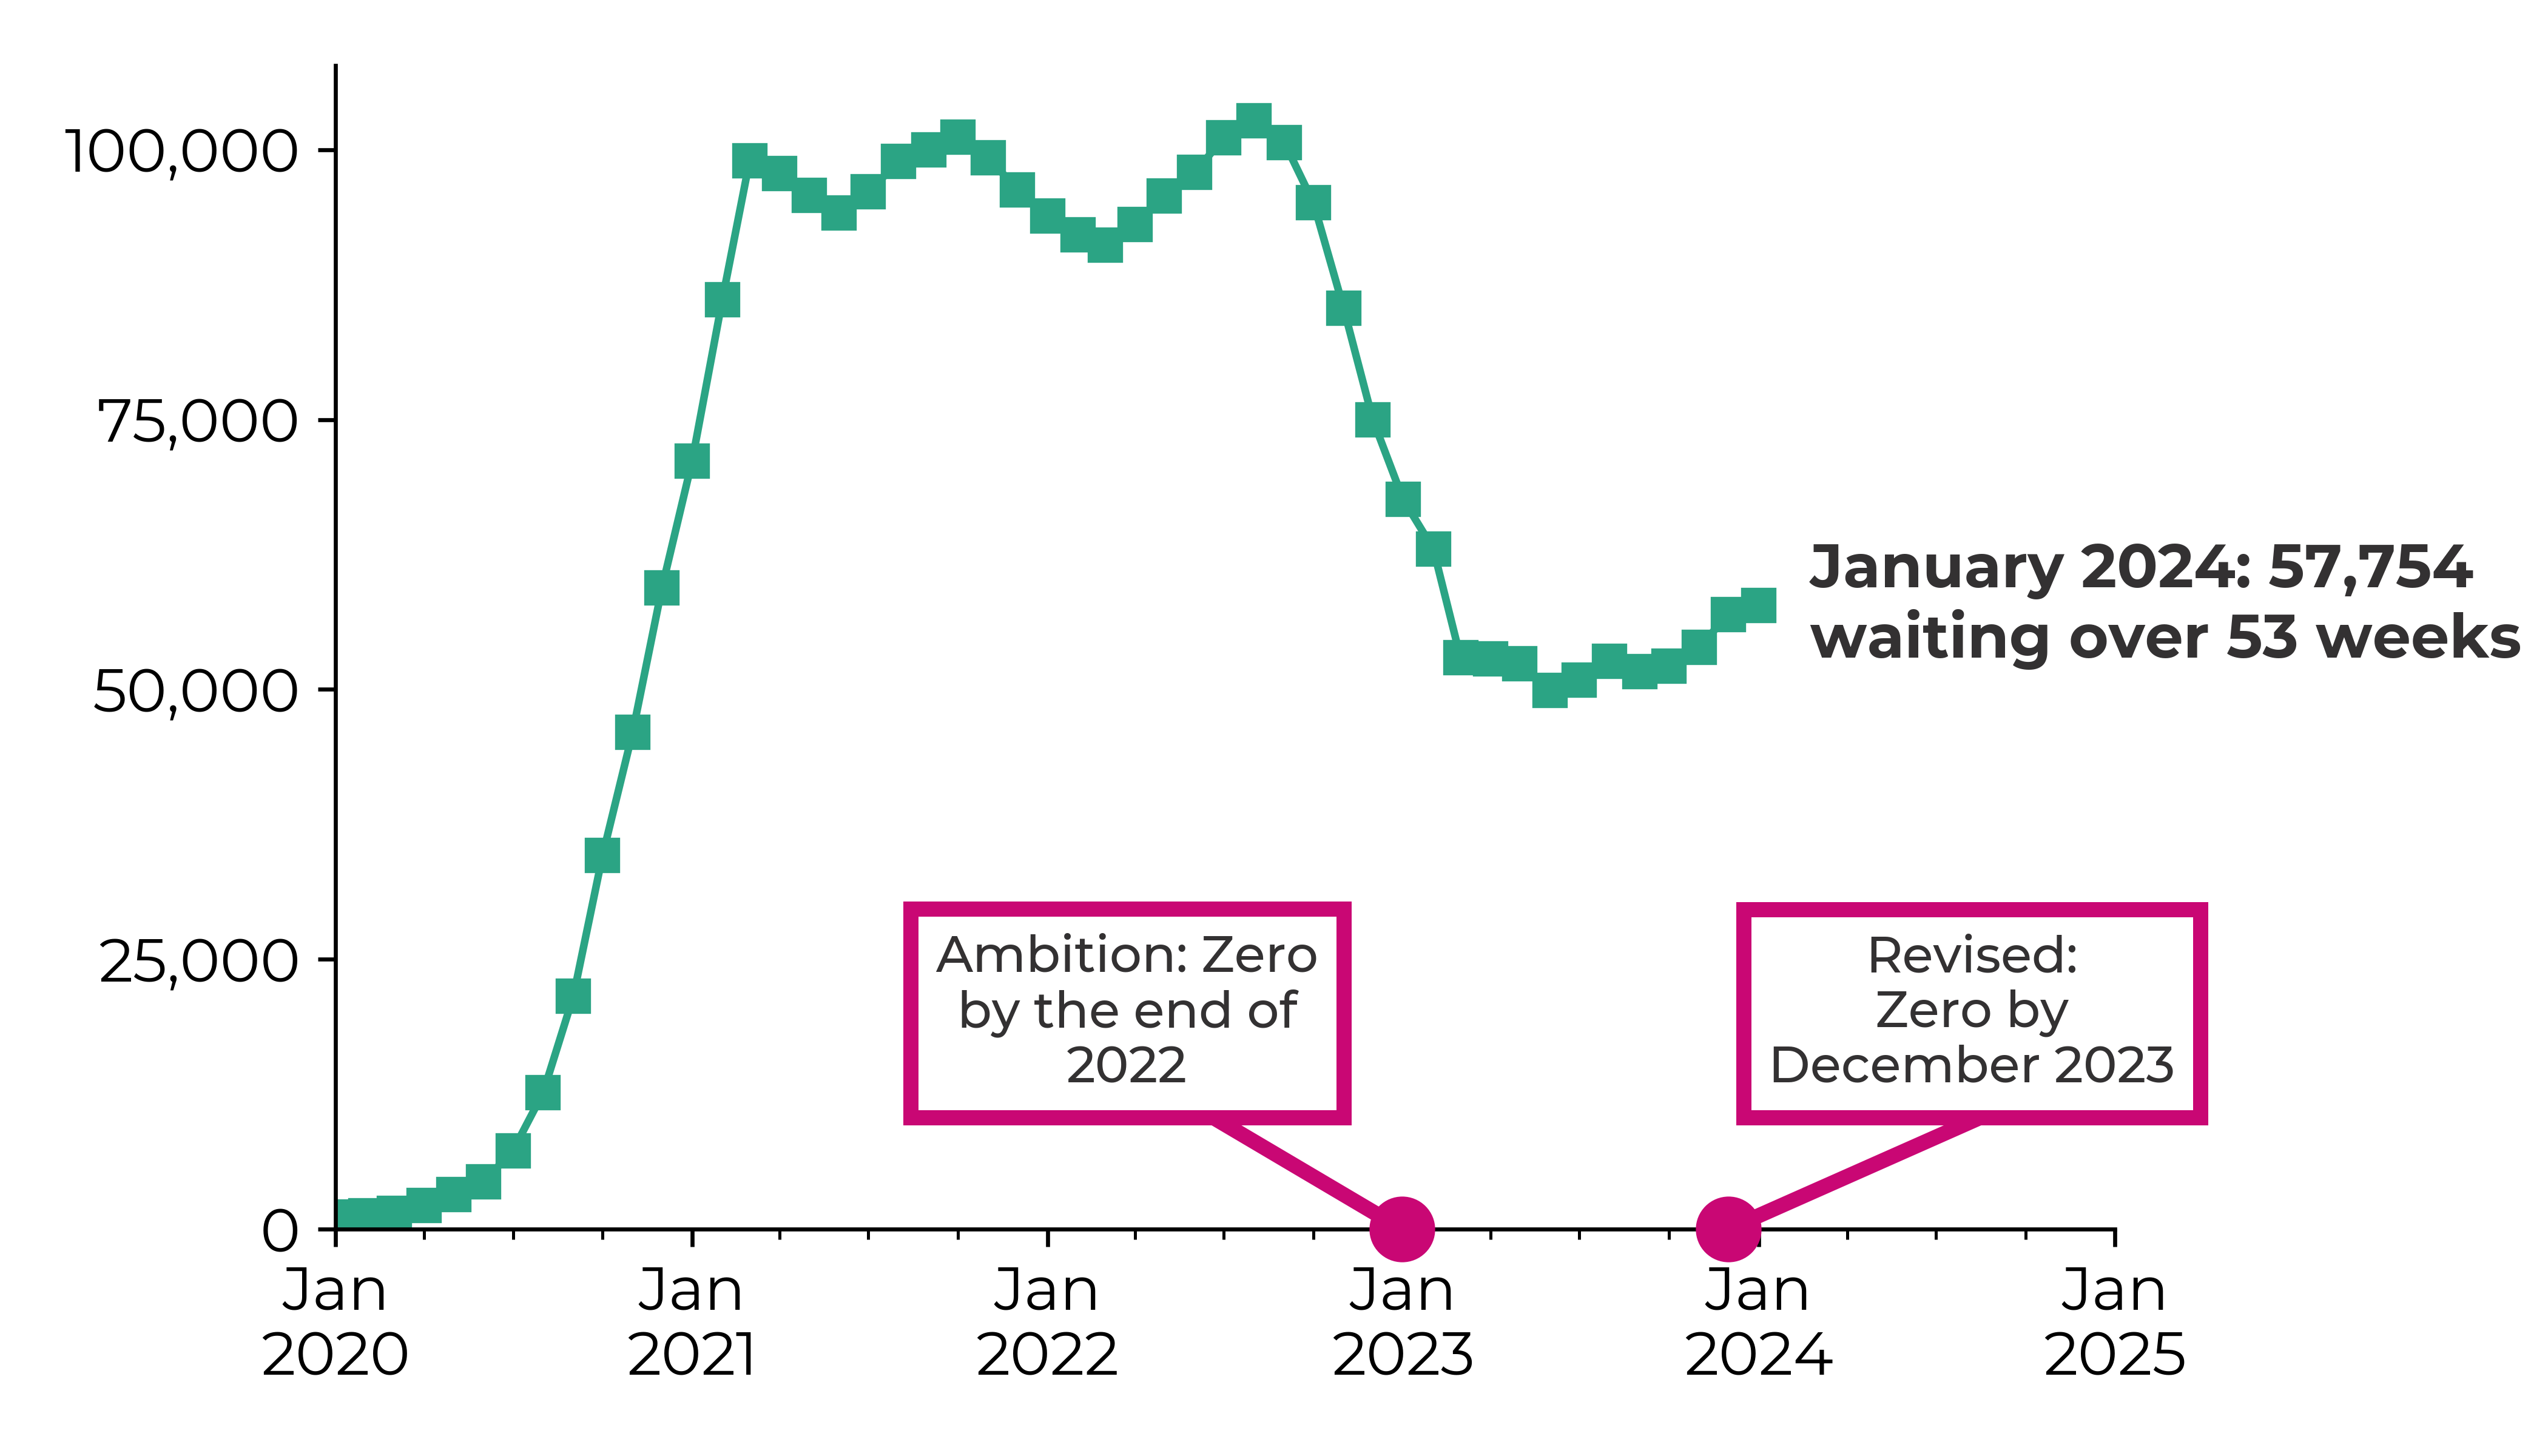 Graph showing the number of patient pathways waiting over 53 weeks increased from 1,106 in January 2020 to 95,720 in May 2022. Against an ambition of zero by the end of 2022.